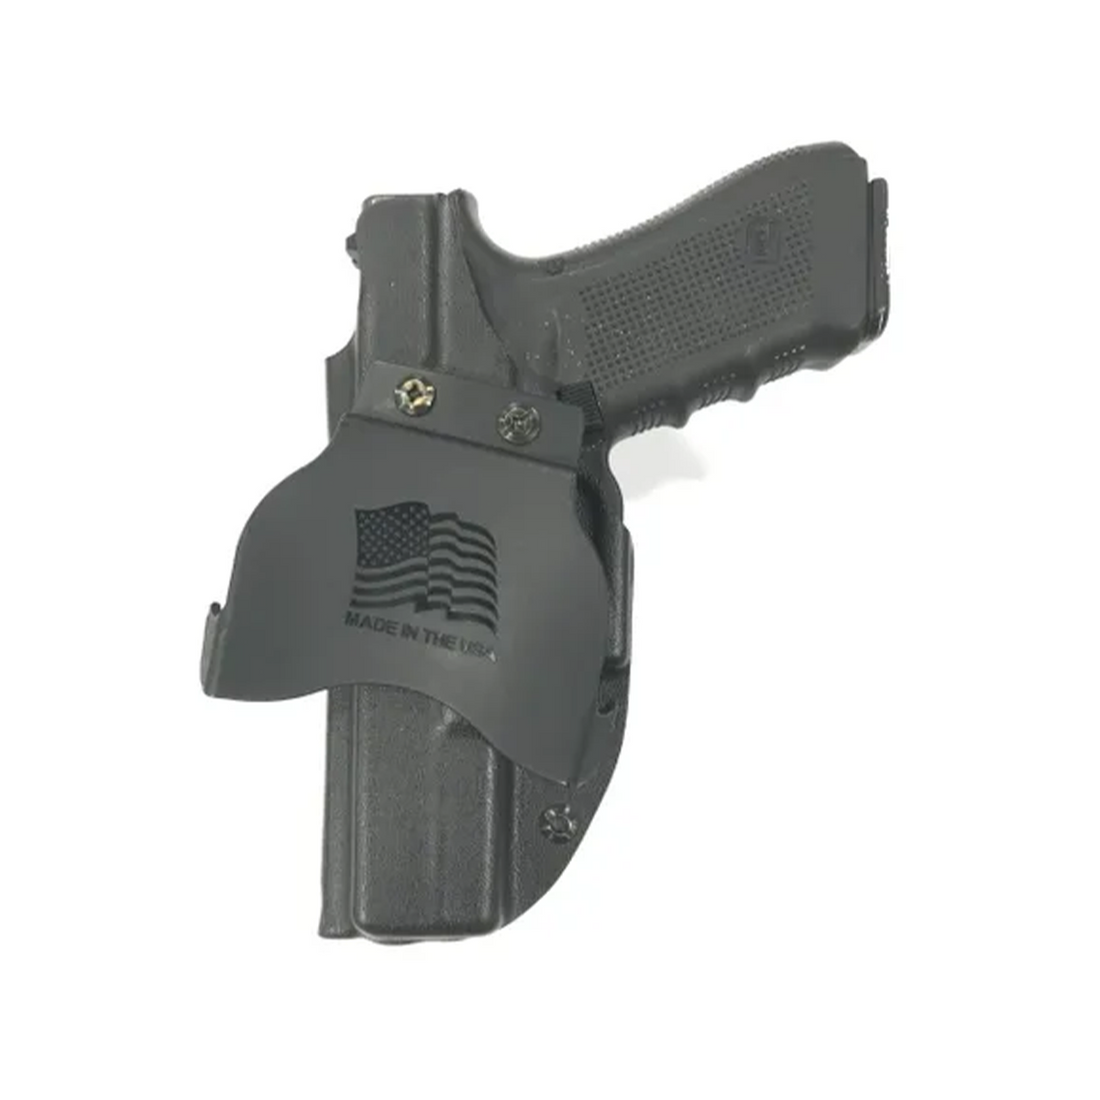 Rock Island Armory OWB Paddle Holsters